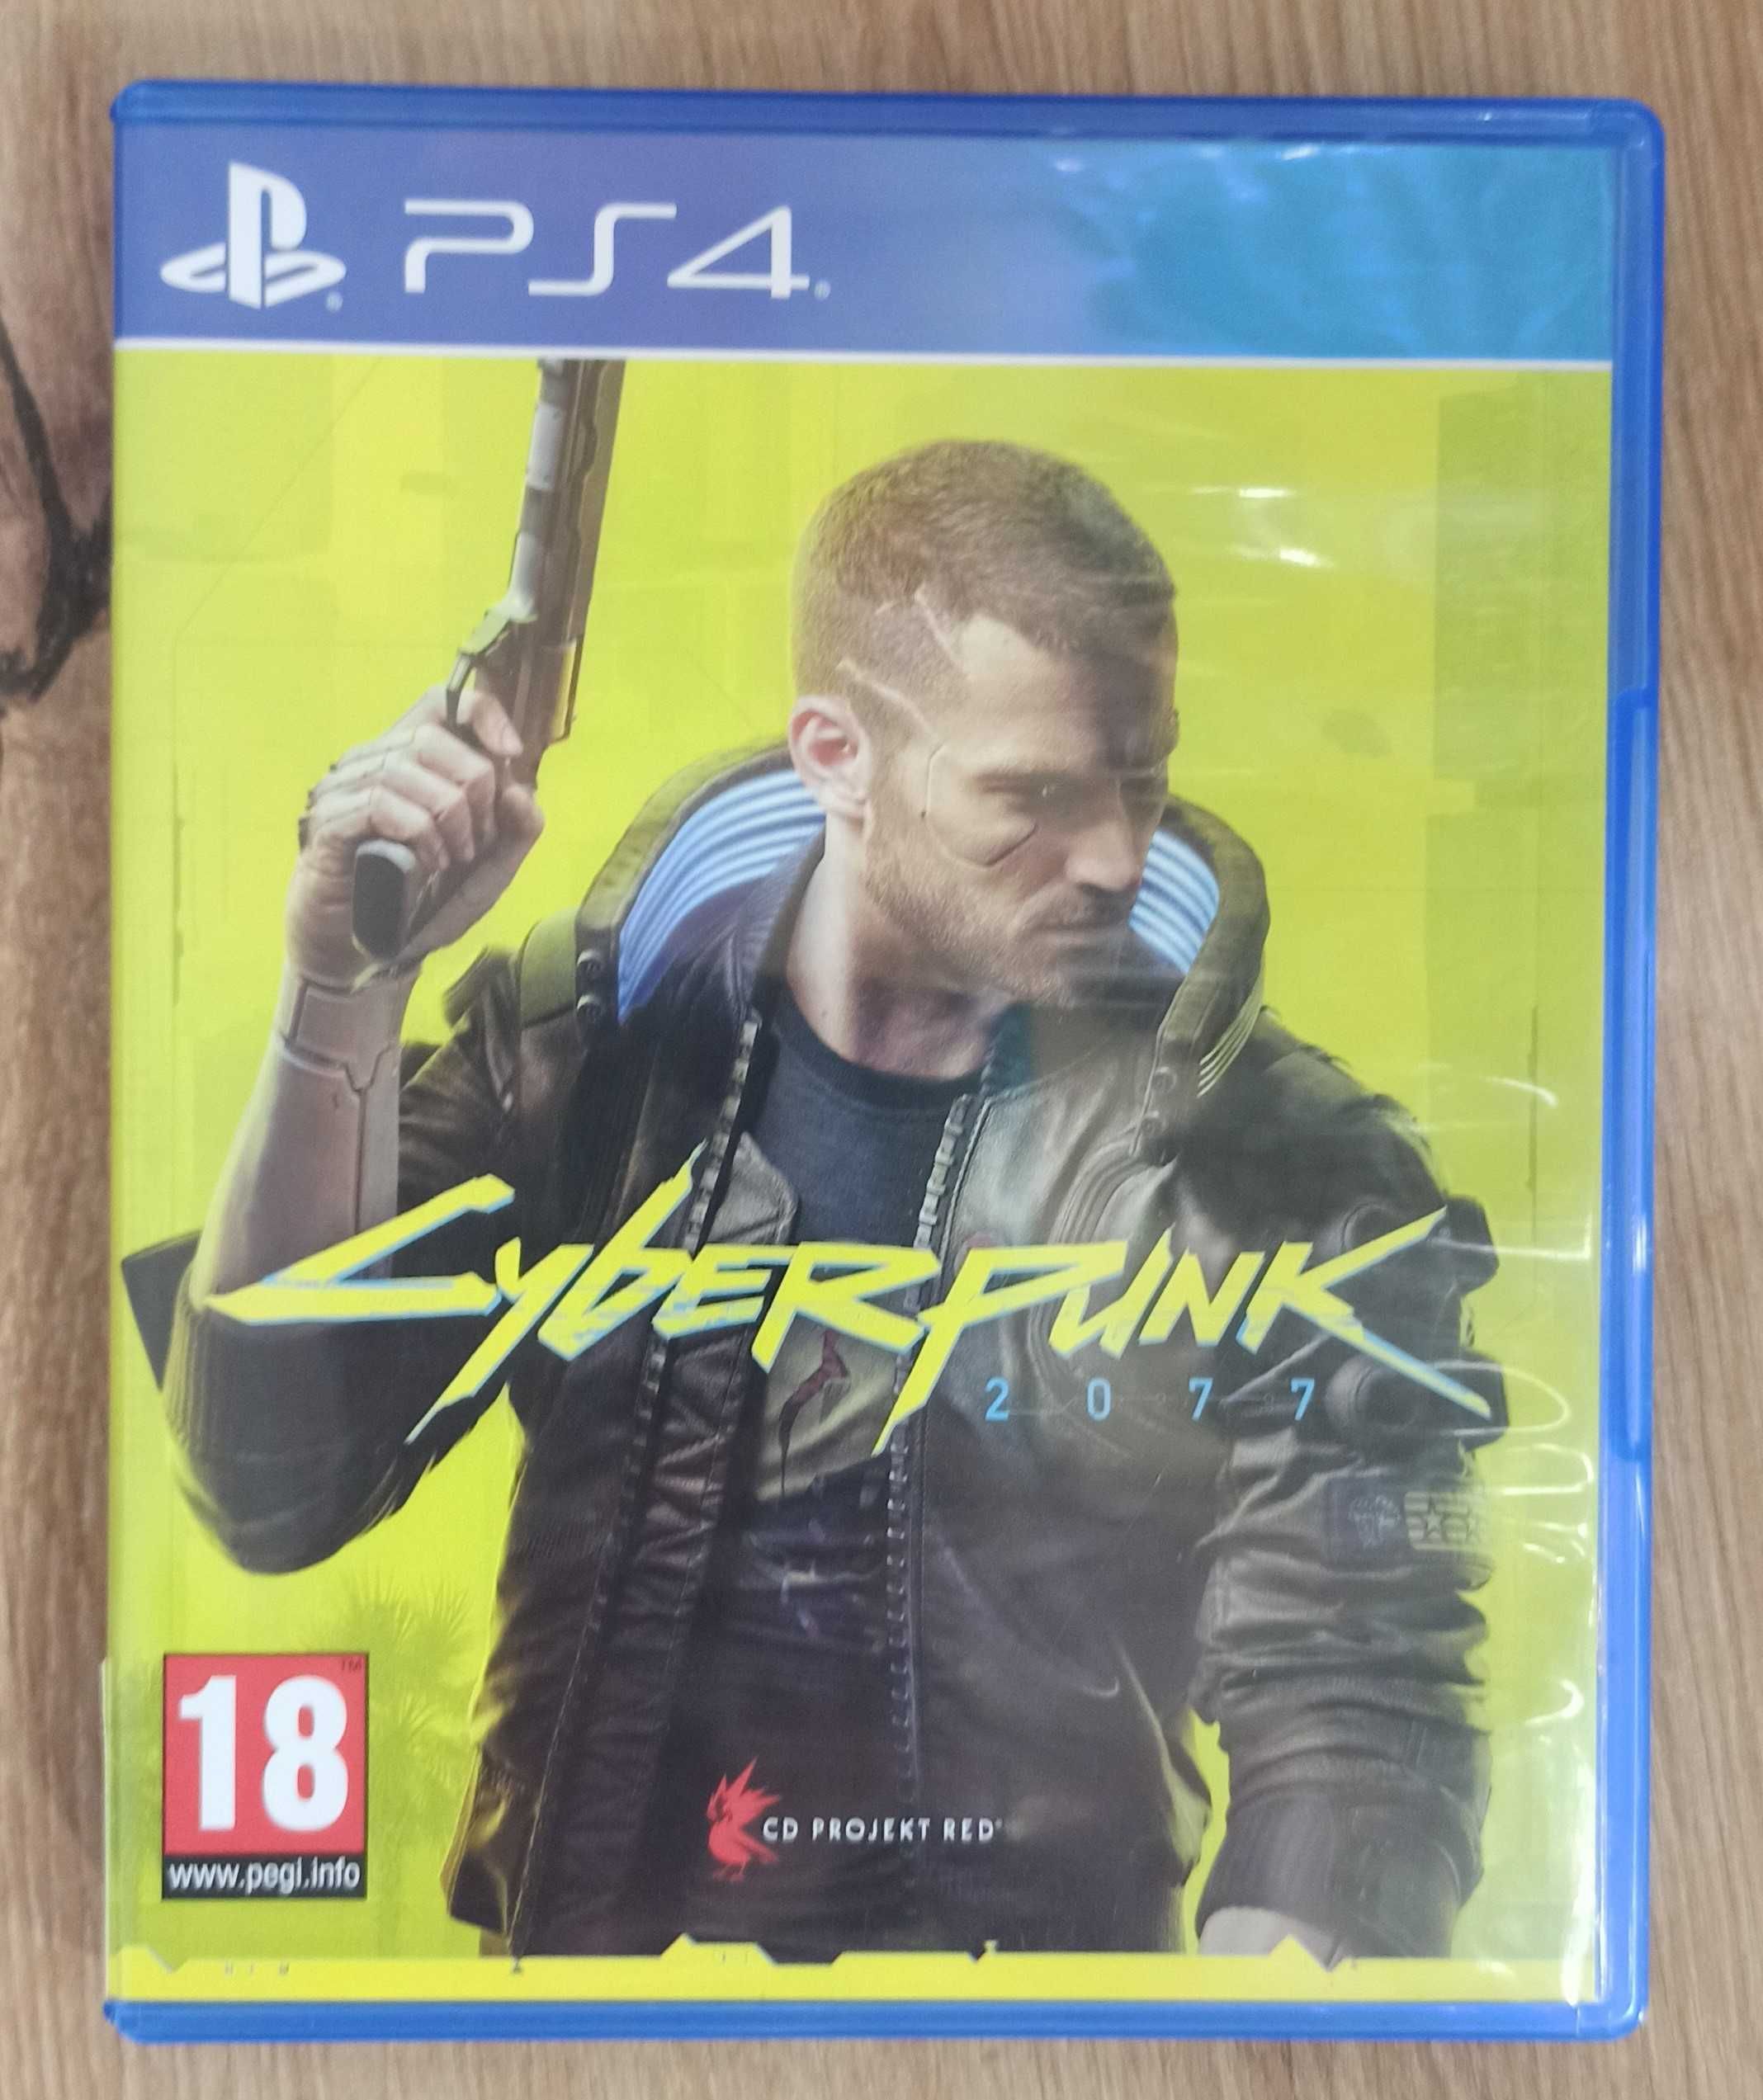 CyberPunk 2077 PS4 - Central Pabianice skup gier